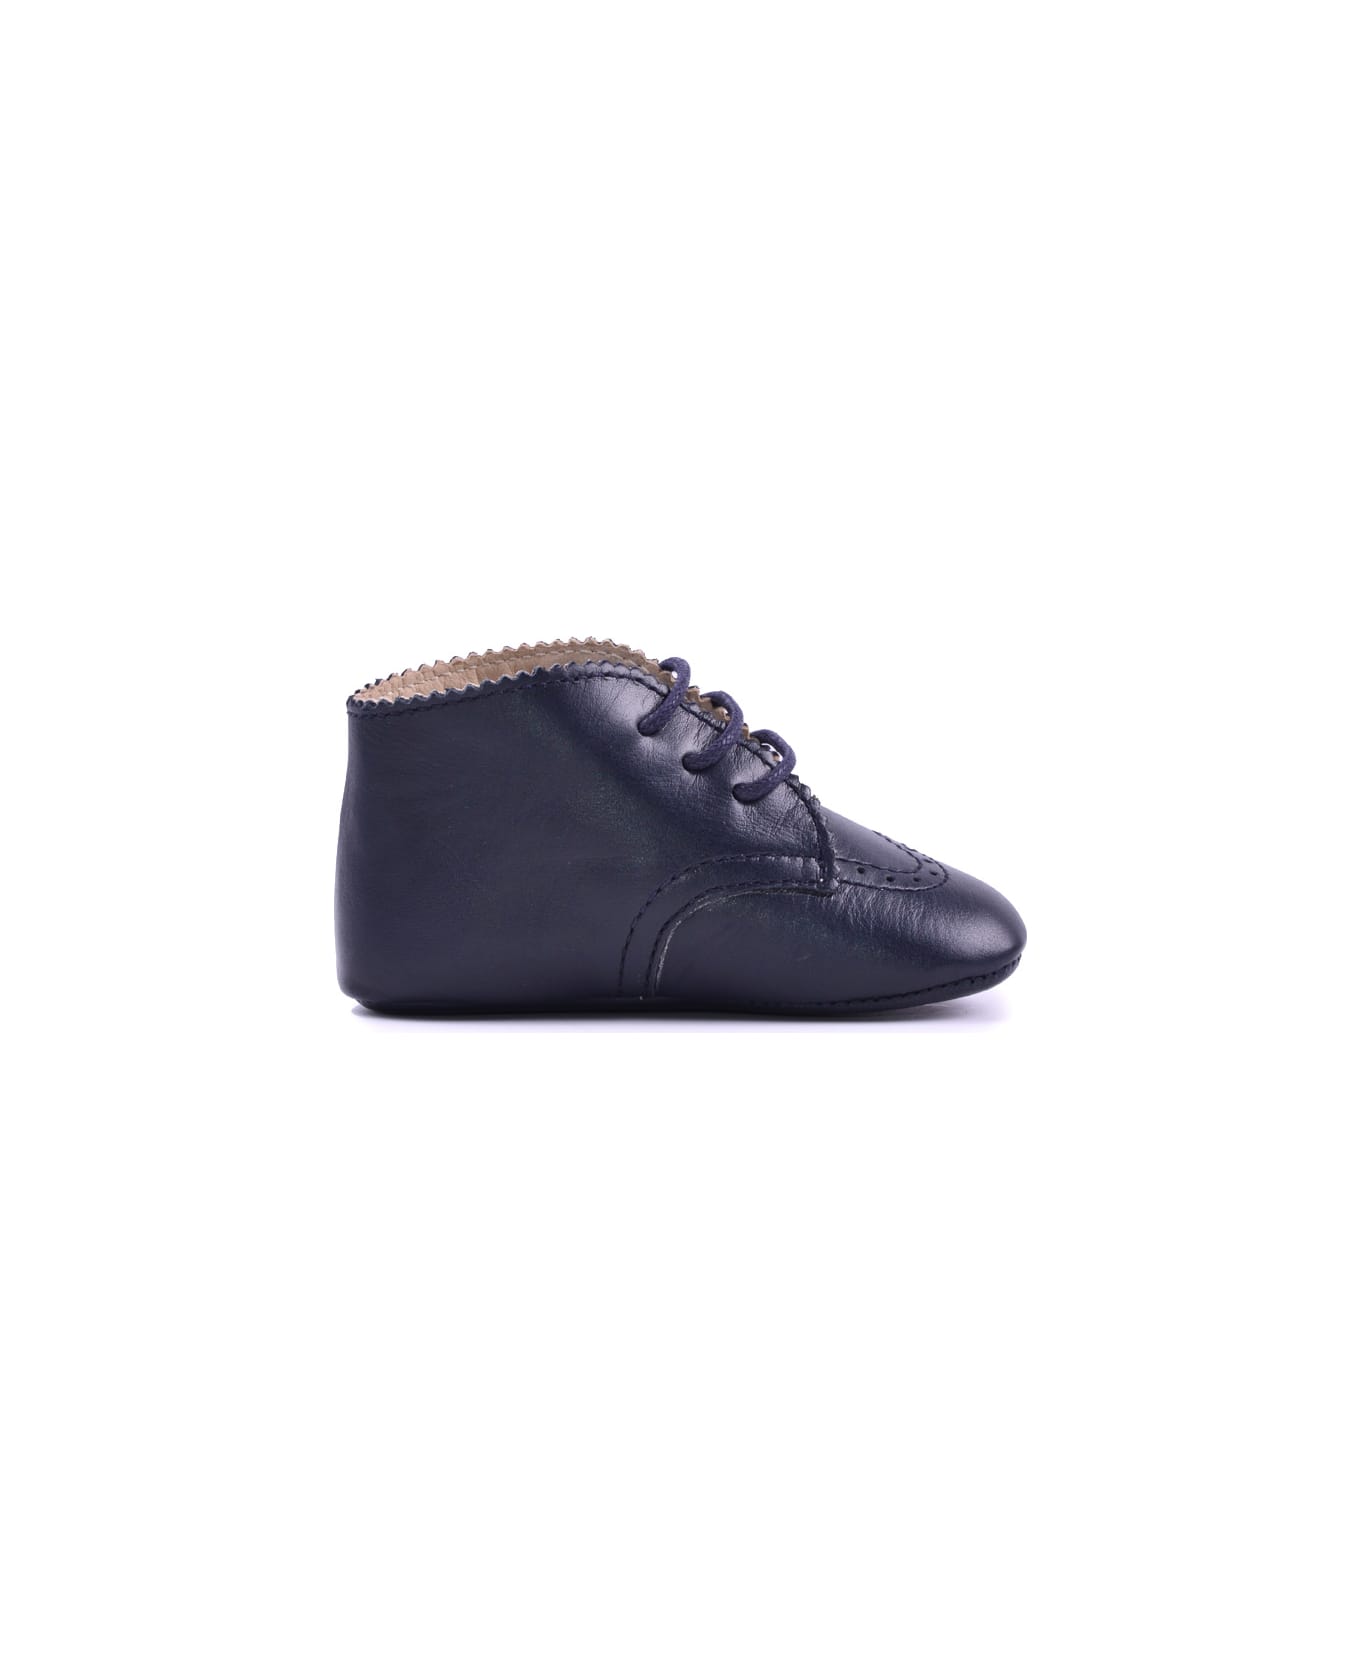 Gallucci Leather Sneakers - Blue